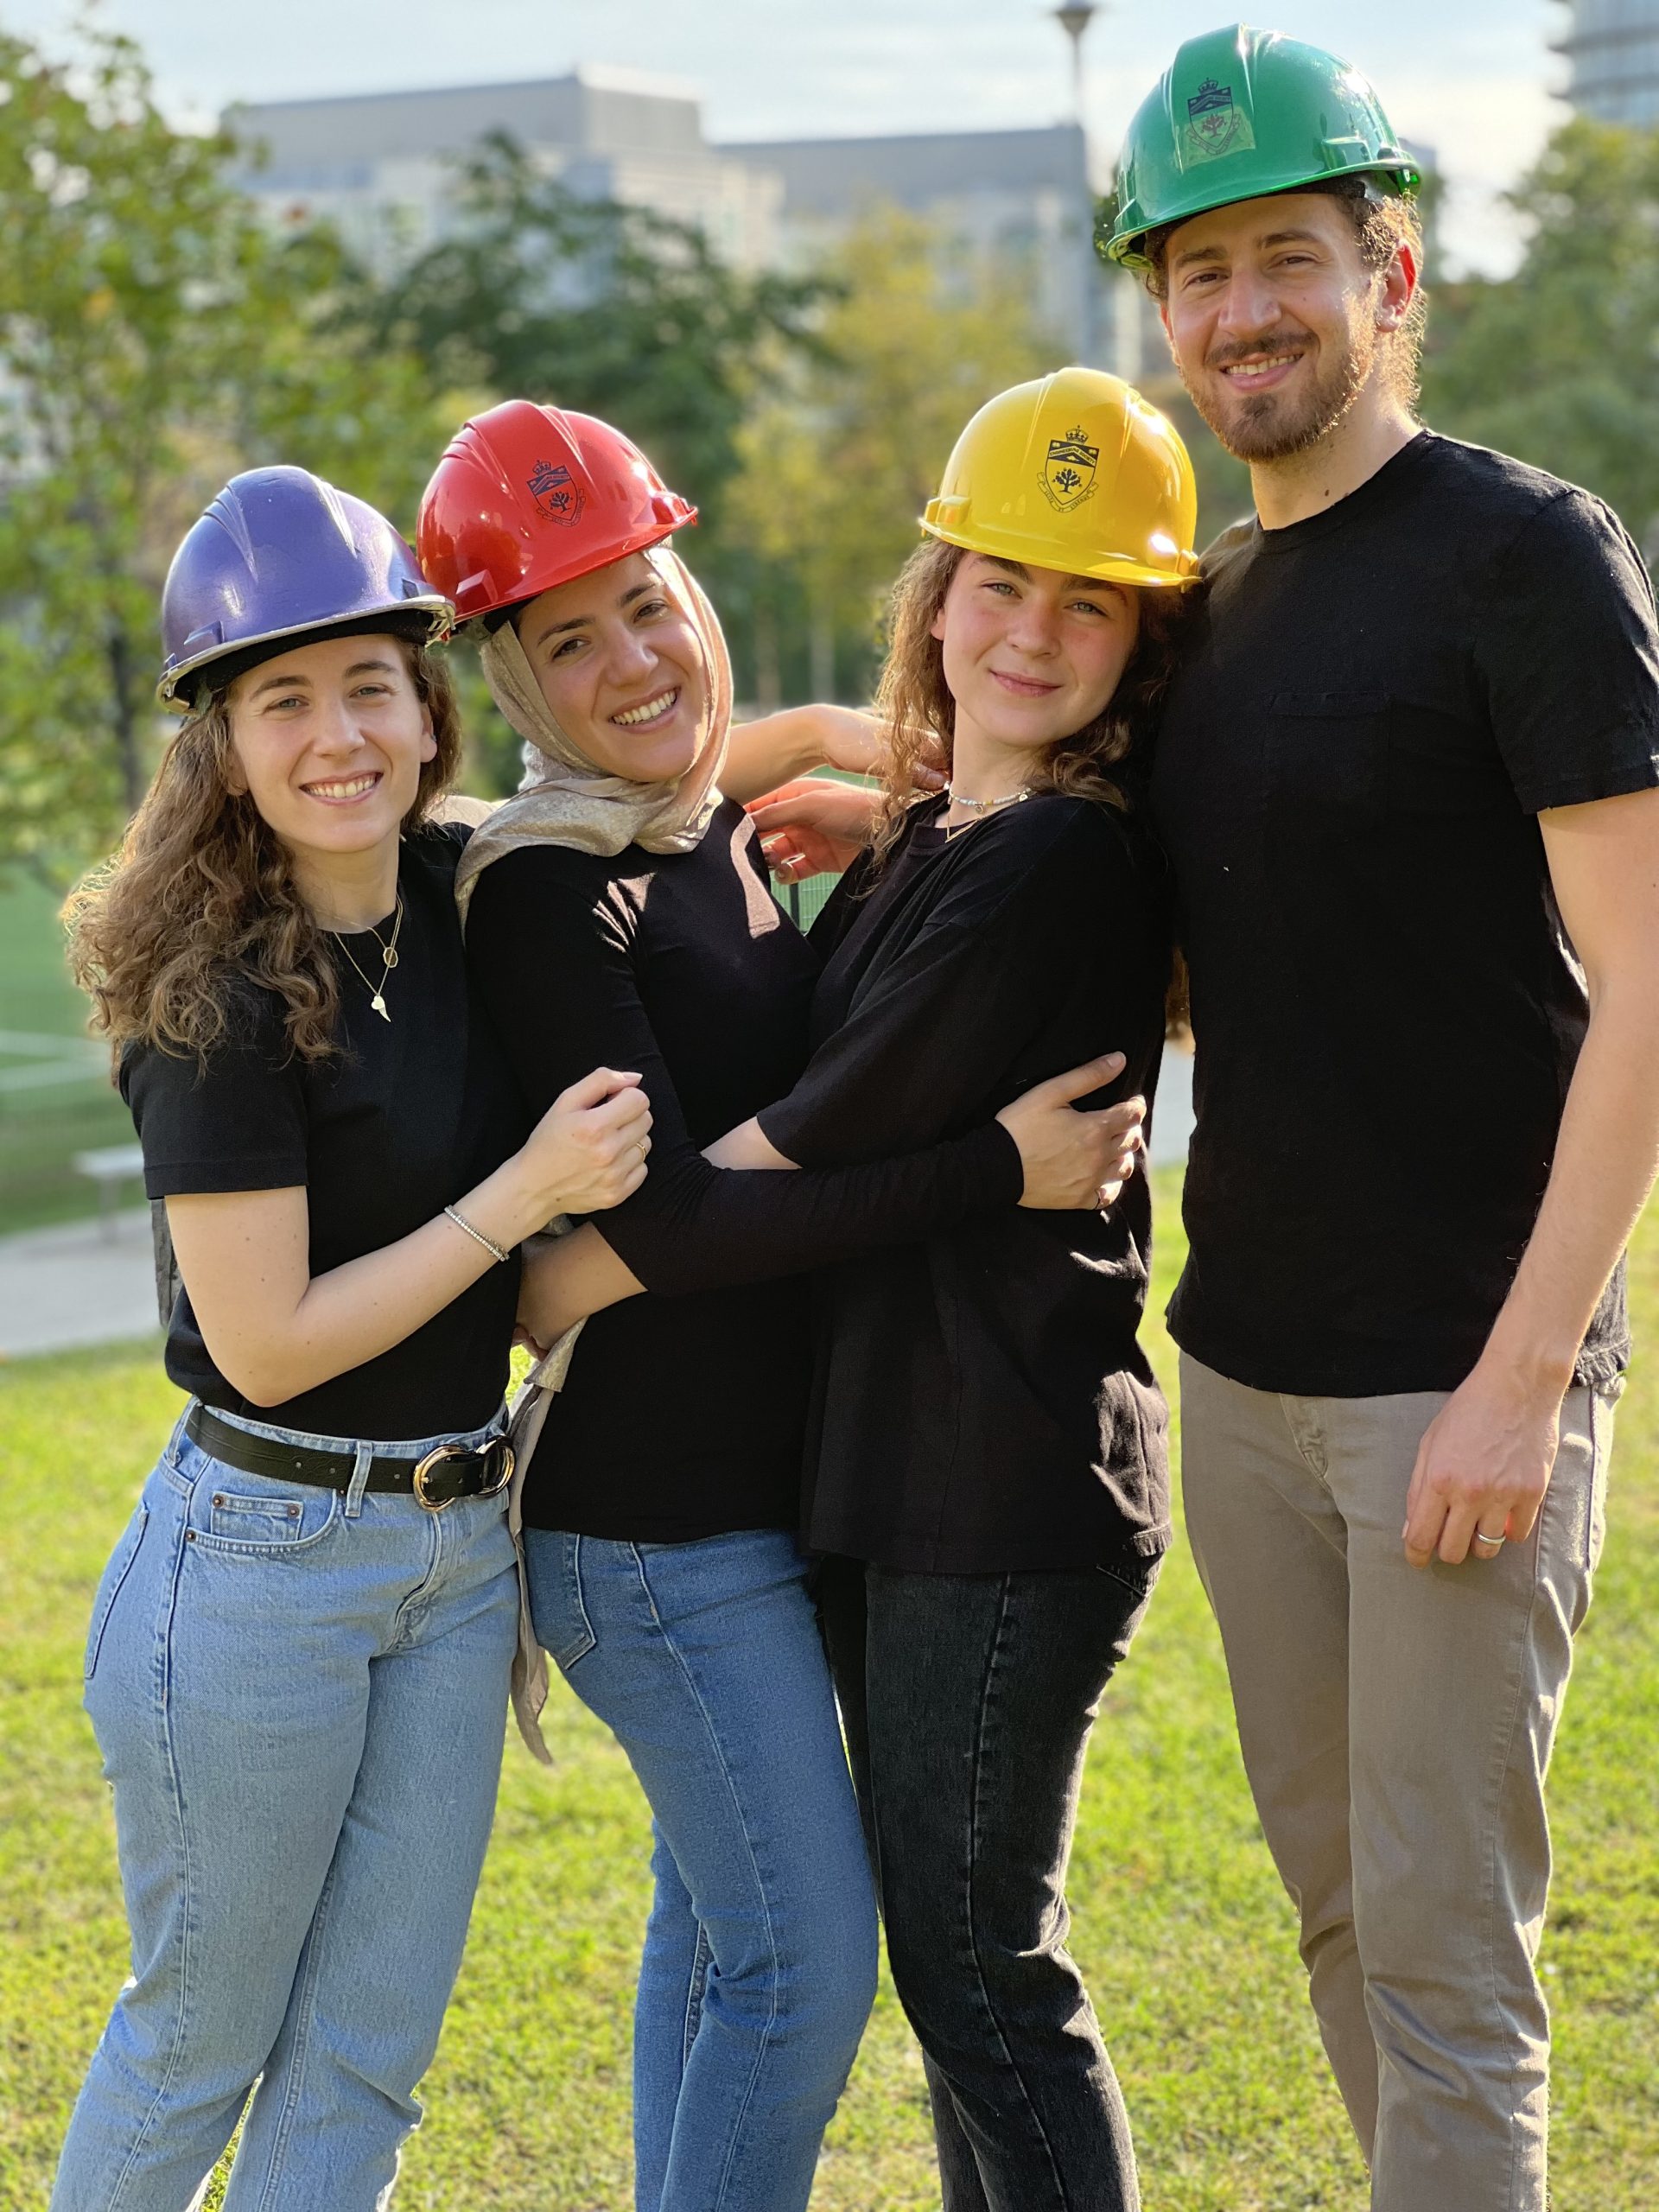 From left to right: Dareen Kutob wears a purple hard hat, Layan Kutob wears a purple hard hat, Taleen Kutob wears a yellow hard hat and Kazem Kutob wears a green hard hat. The four siblings pose together in an outdoor setting.